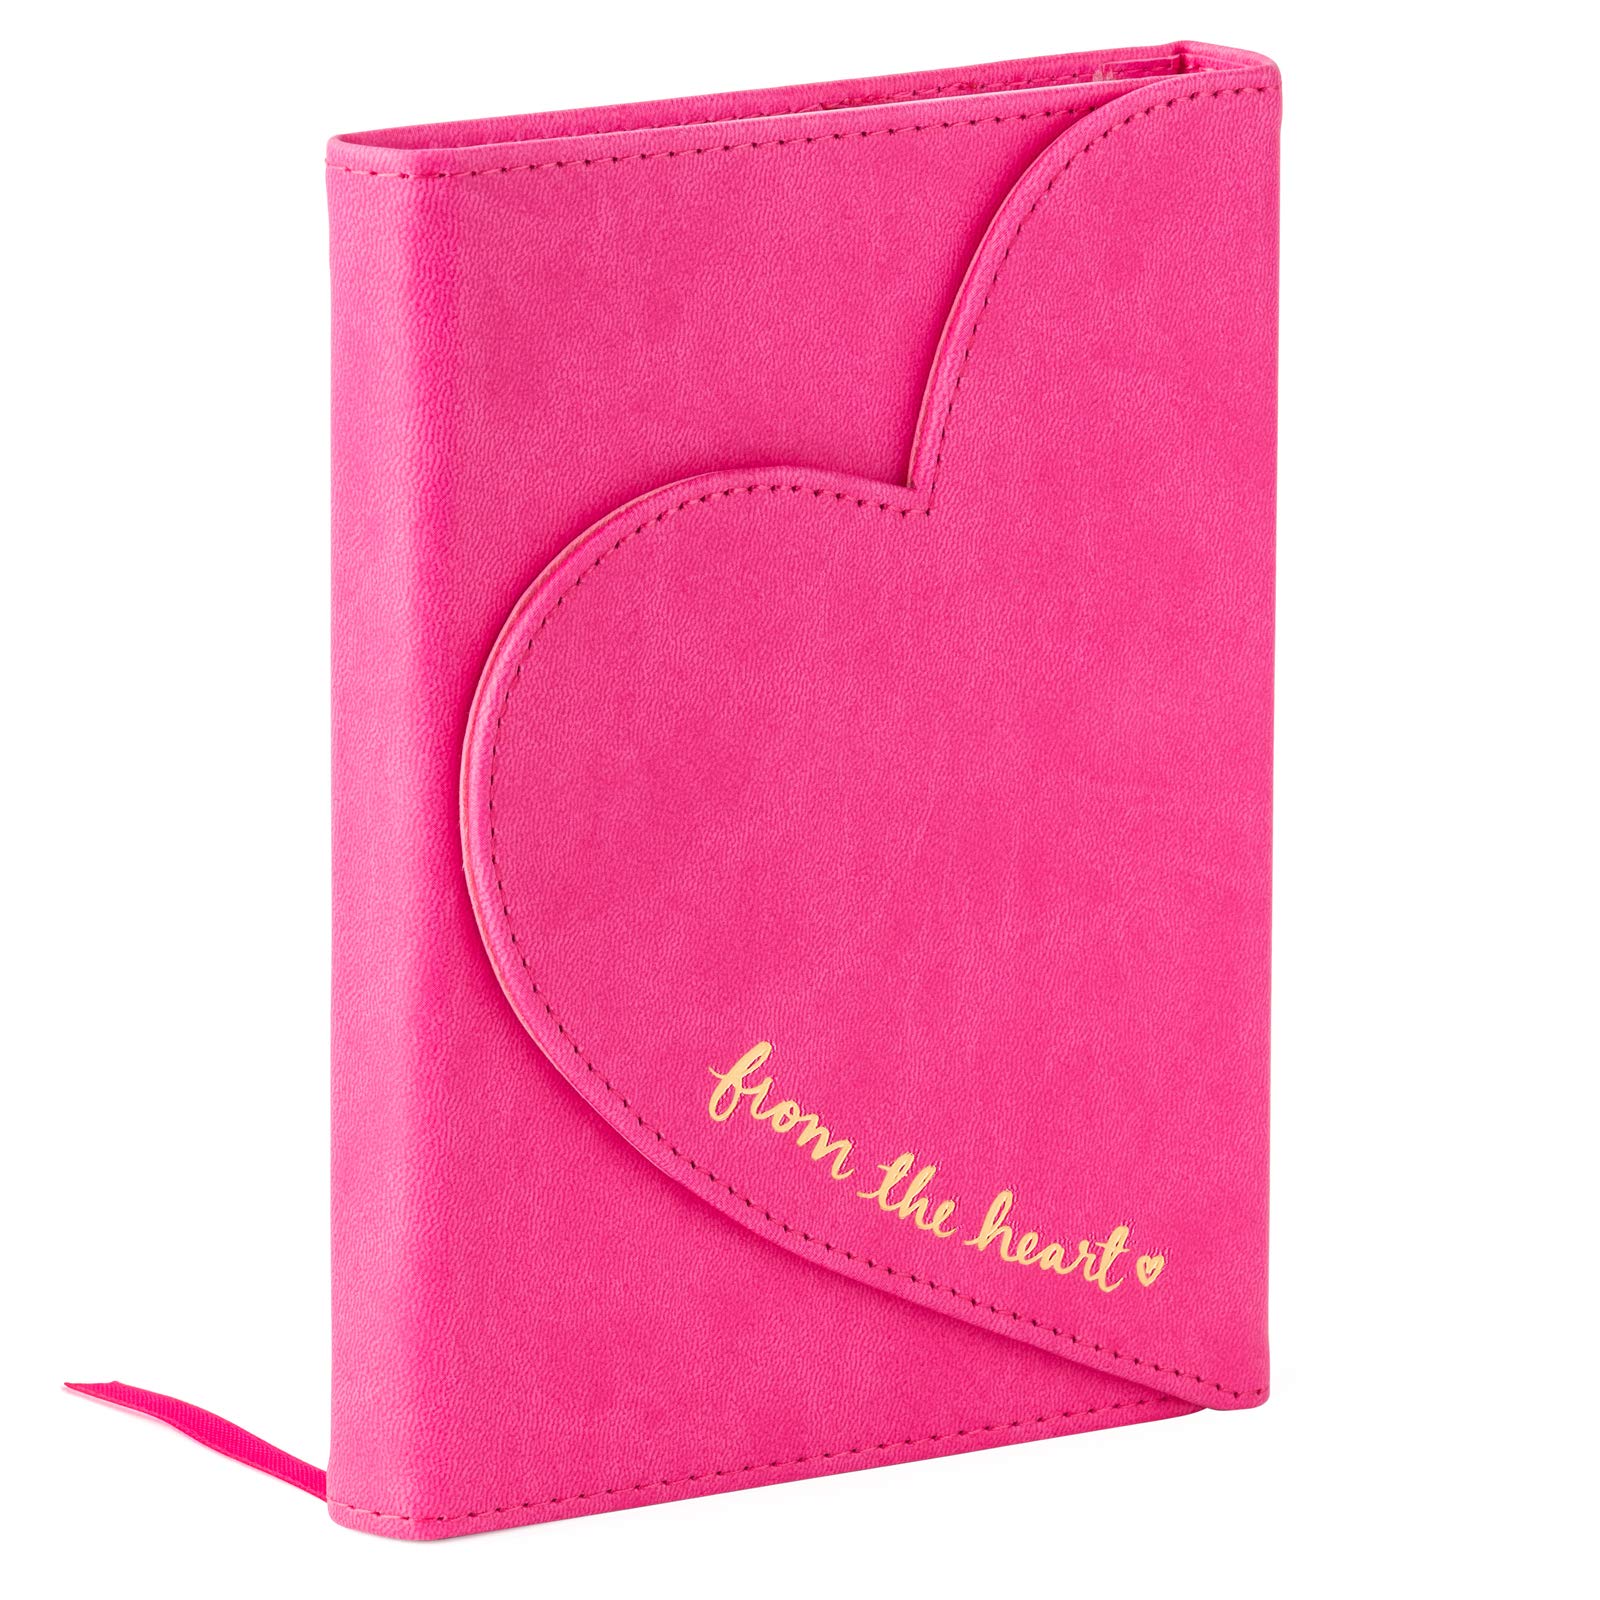 Eccolo Dayna Lee Love Journal Hot Pink Cover